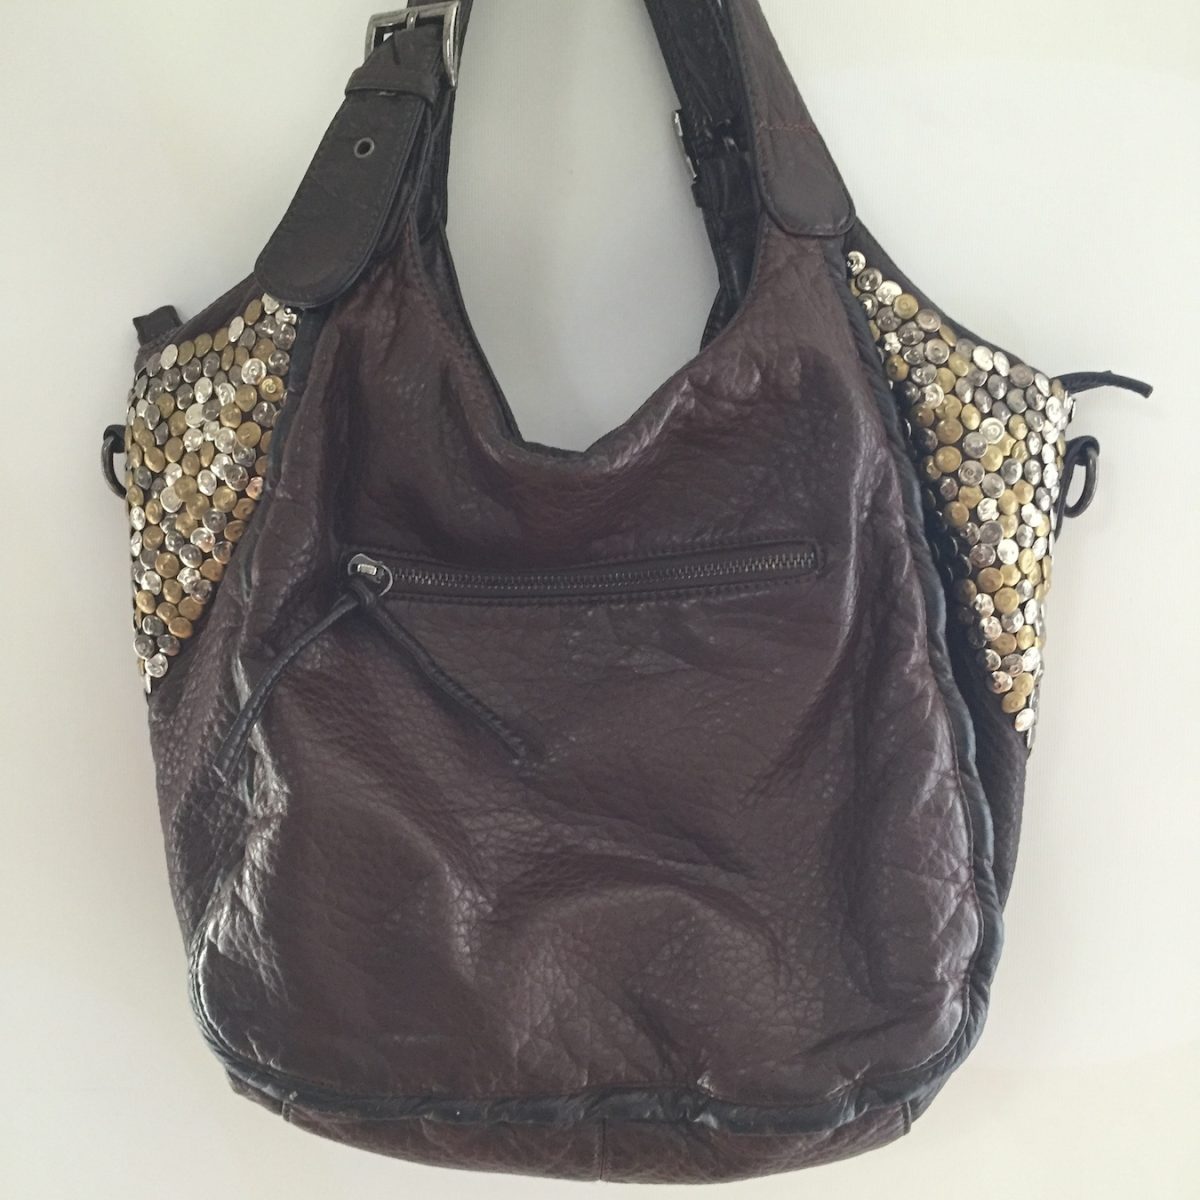 bolso-outlet72-piel-tachas